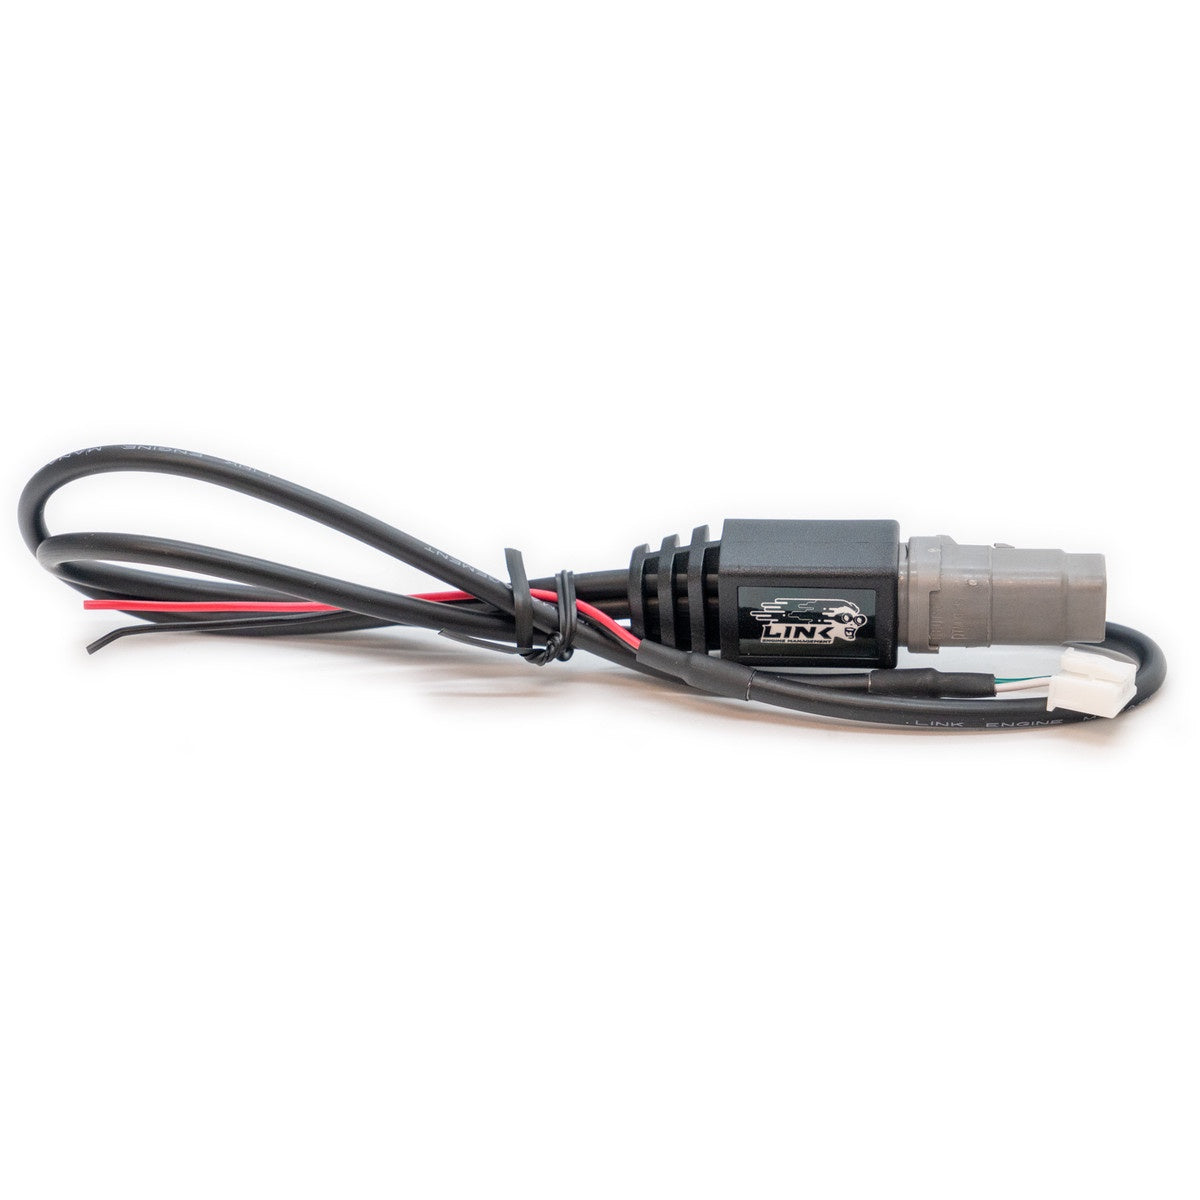 Link CAN Connection Cable for G4X/G4+ Plug-in ECU’s (CANJST)